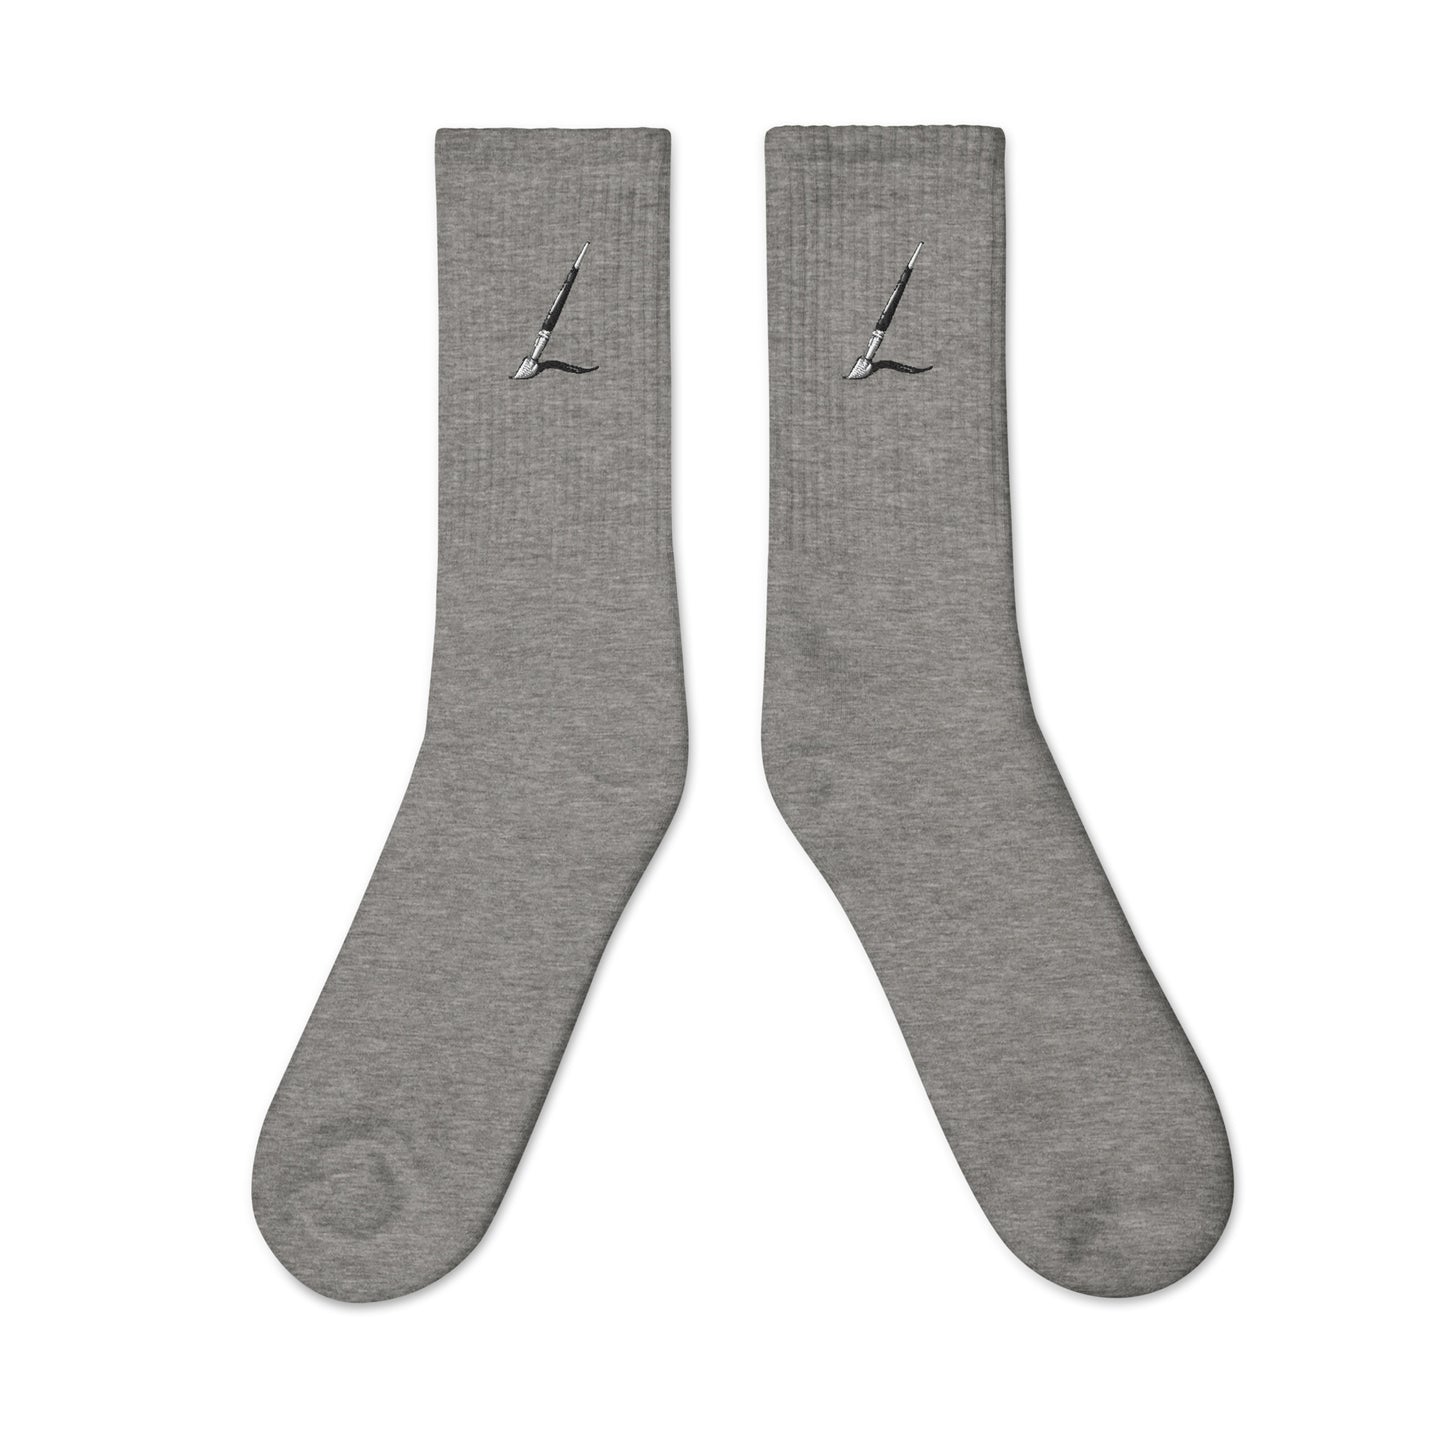  socks-from-the-front-with-paintbrush-symbol